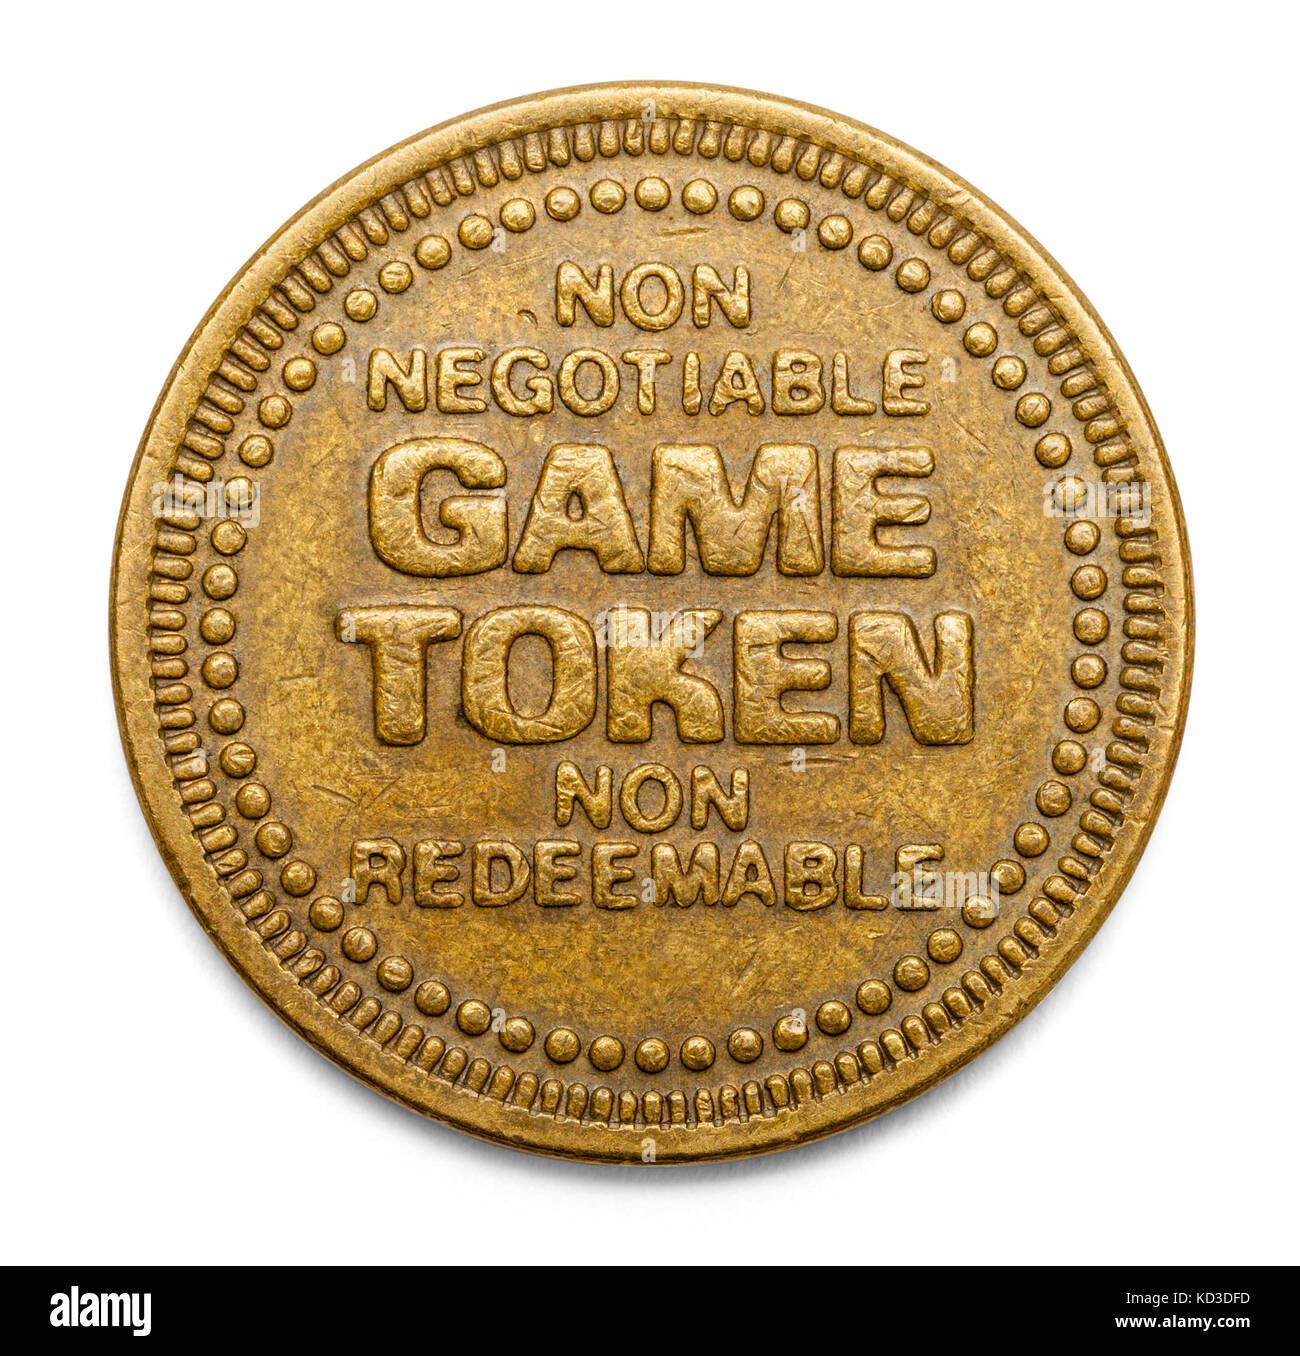 Arcade Video Game Token Isolated on White Background. Stock Photo